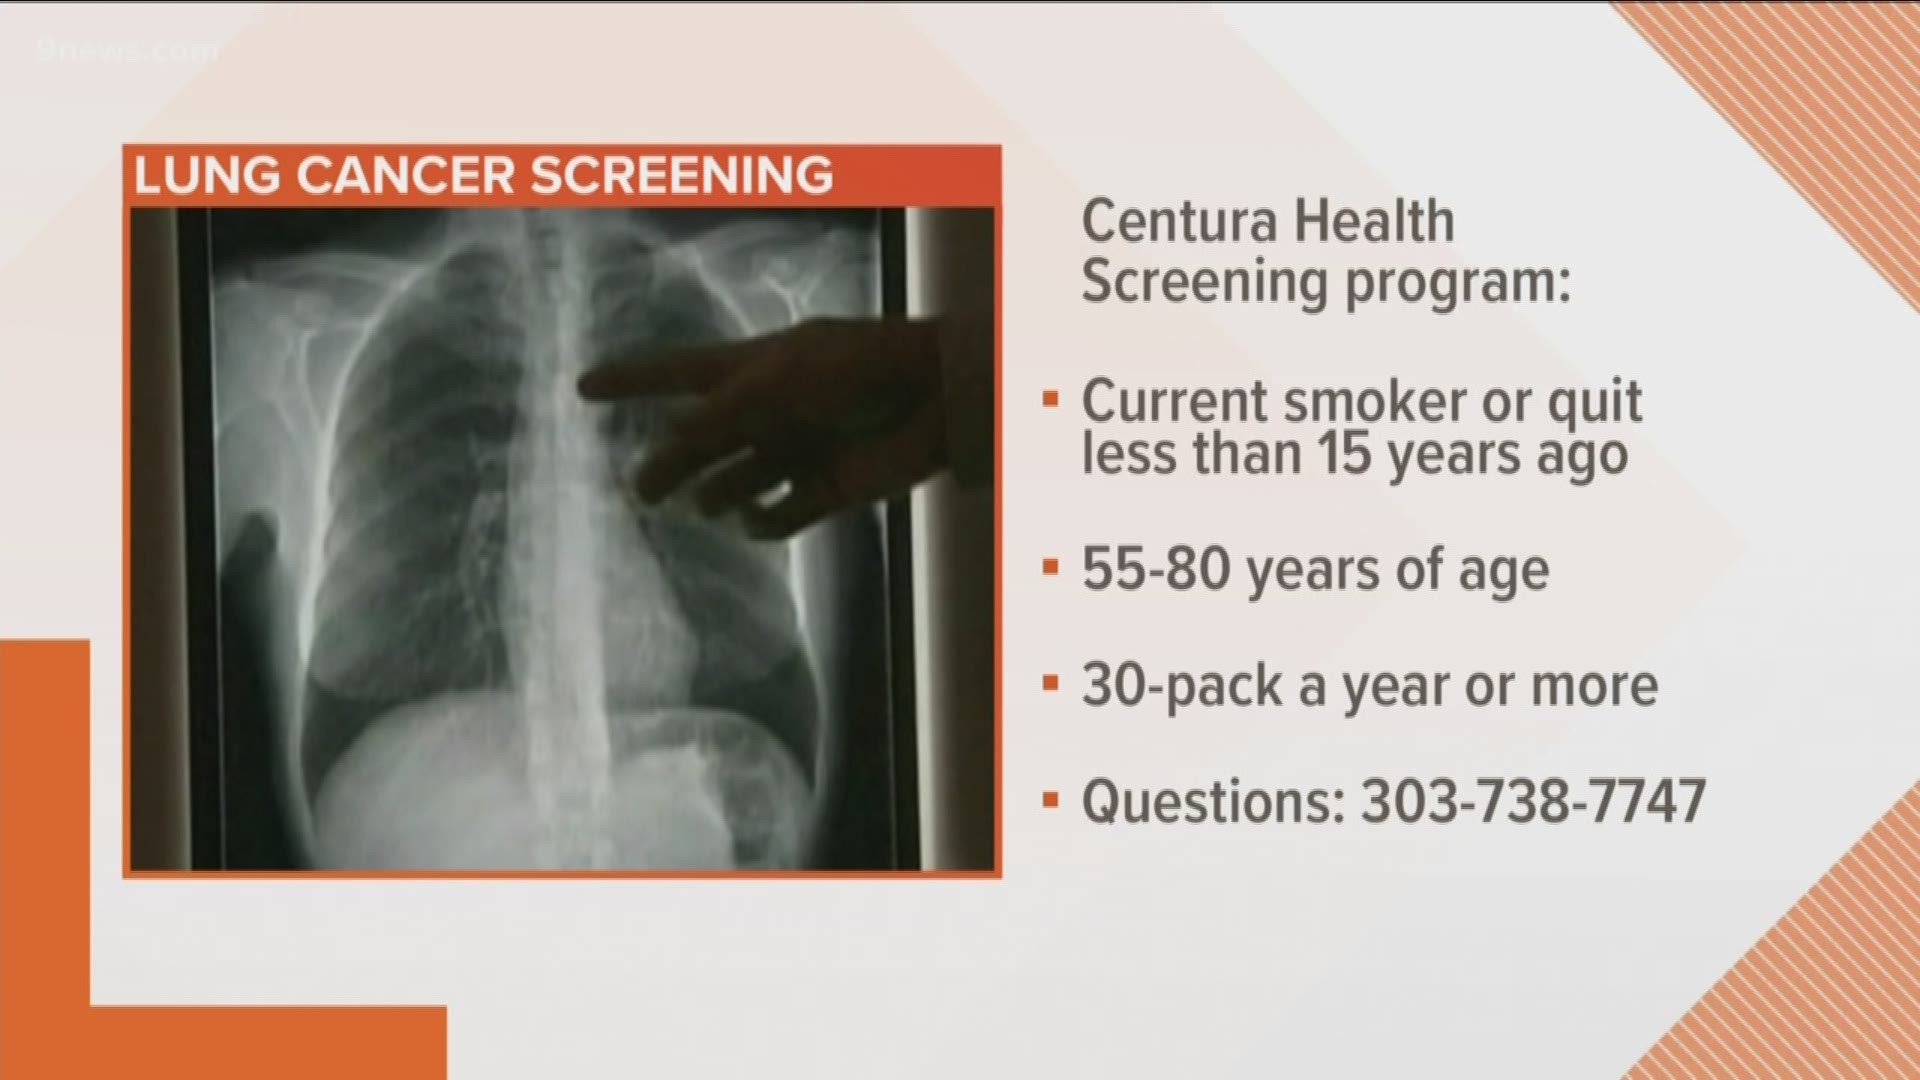 Dr. Nitin Gupta with Littleton Adventist Hospital wants screenings for lung cancer to be more common. He talks about risk factors and who should be screened.